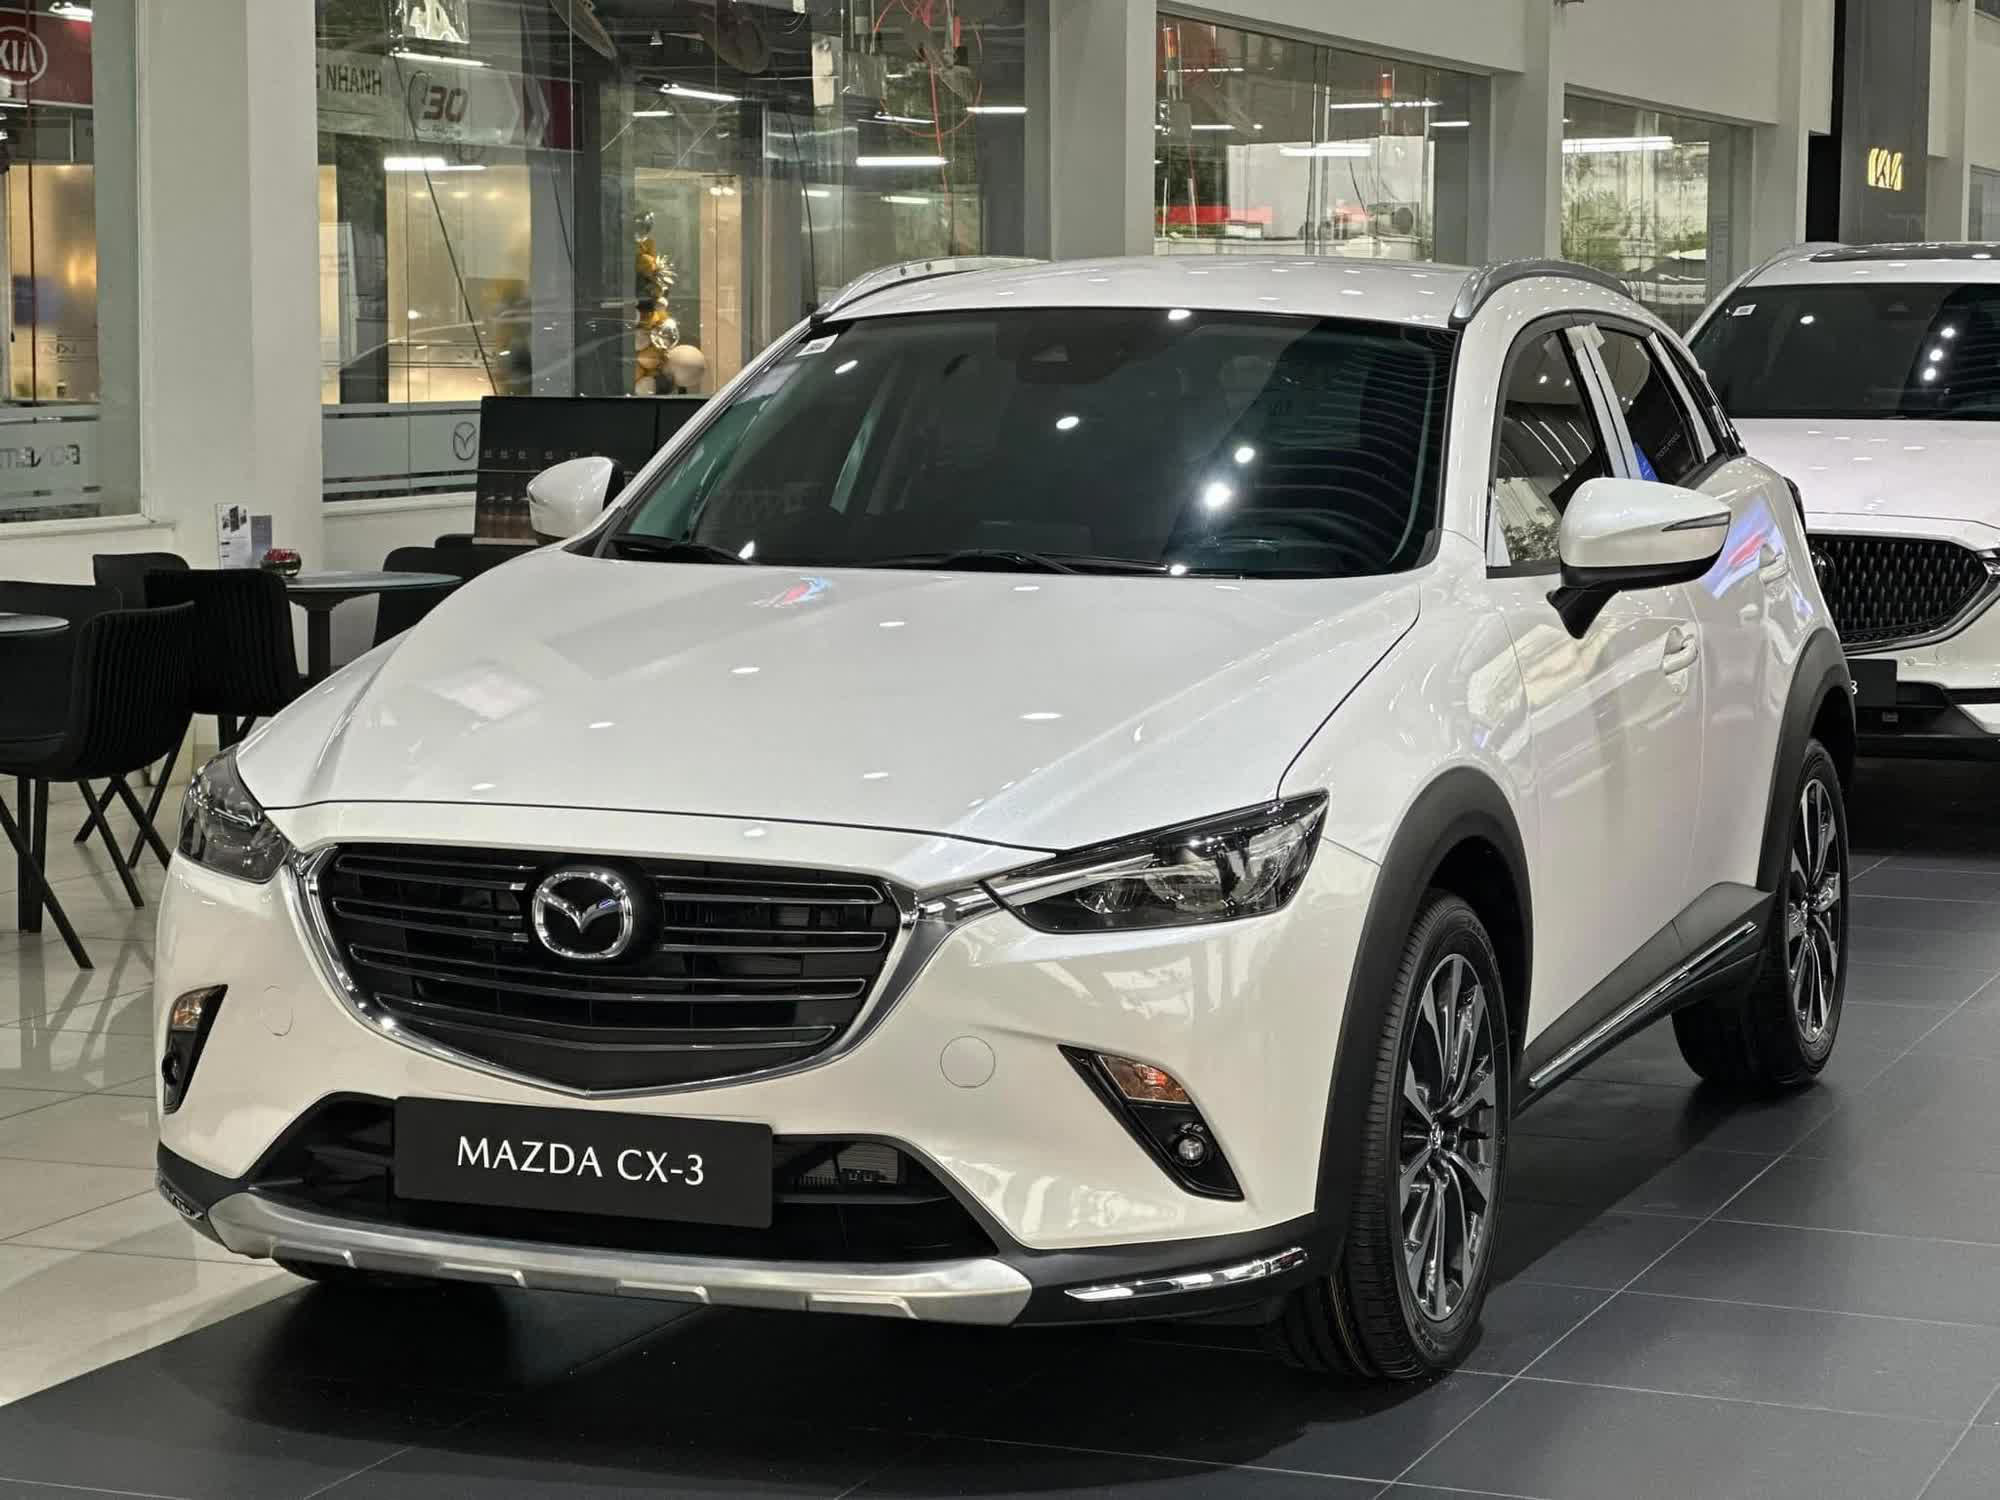 The Mazda CX-3 remains in the price adjusted list this time too.  With the new price, the Mazda CX-3 becomes the second cheapest car in the B-size SUV segment after the MG ZS - Photo: Mazda Dealer/Facebook 